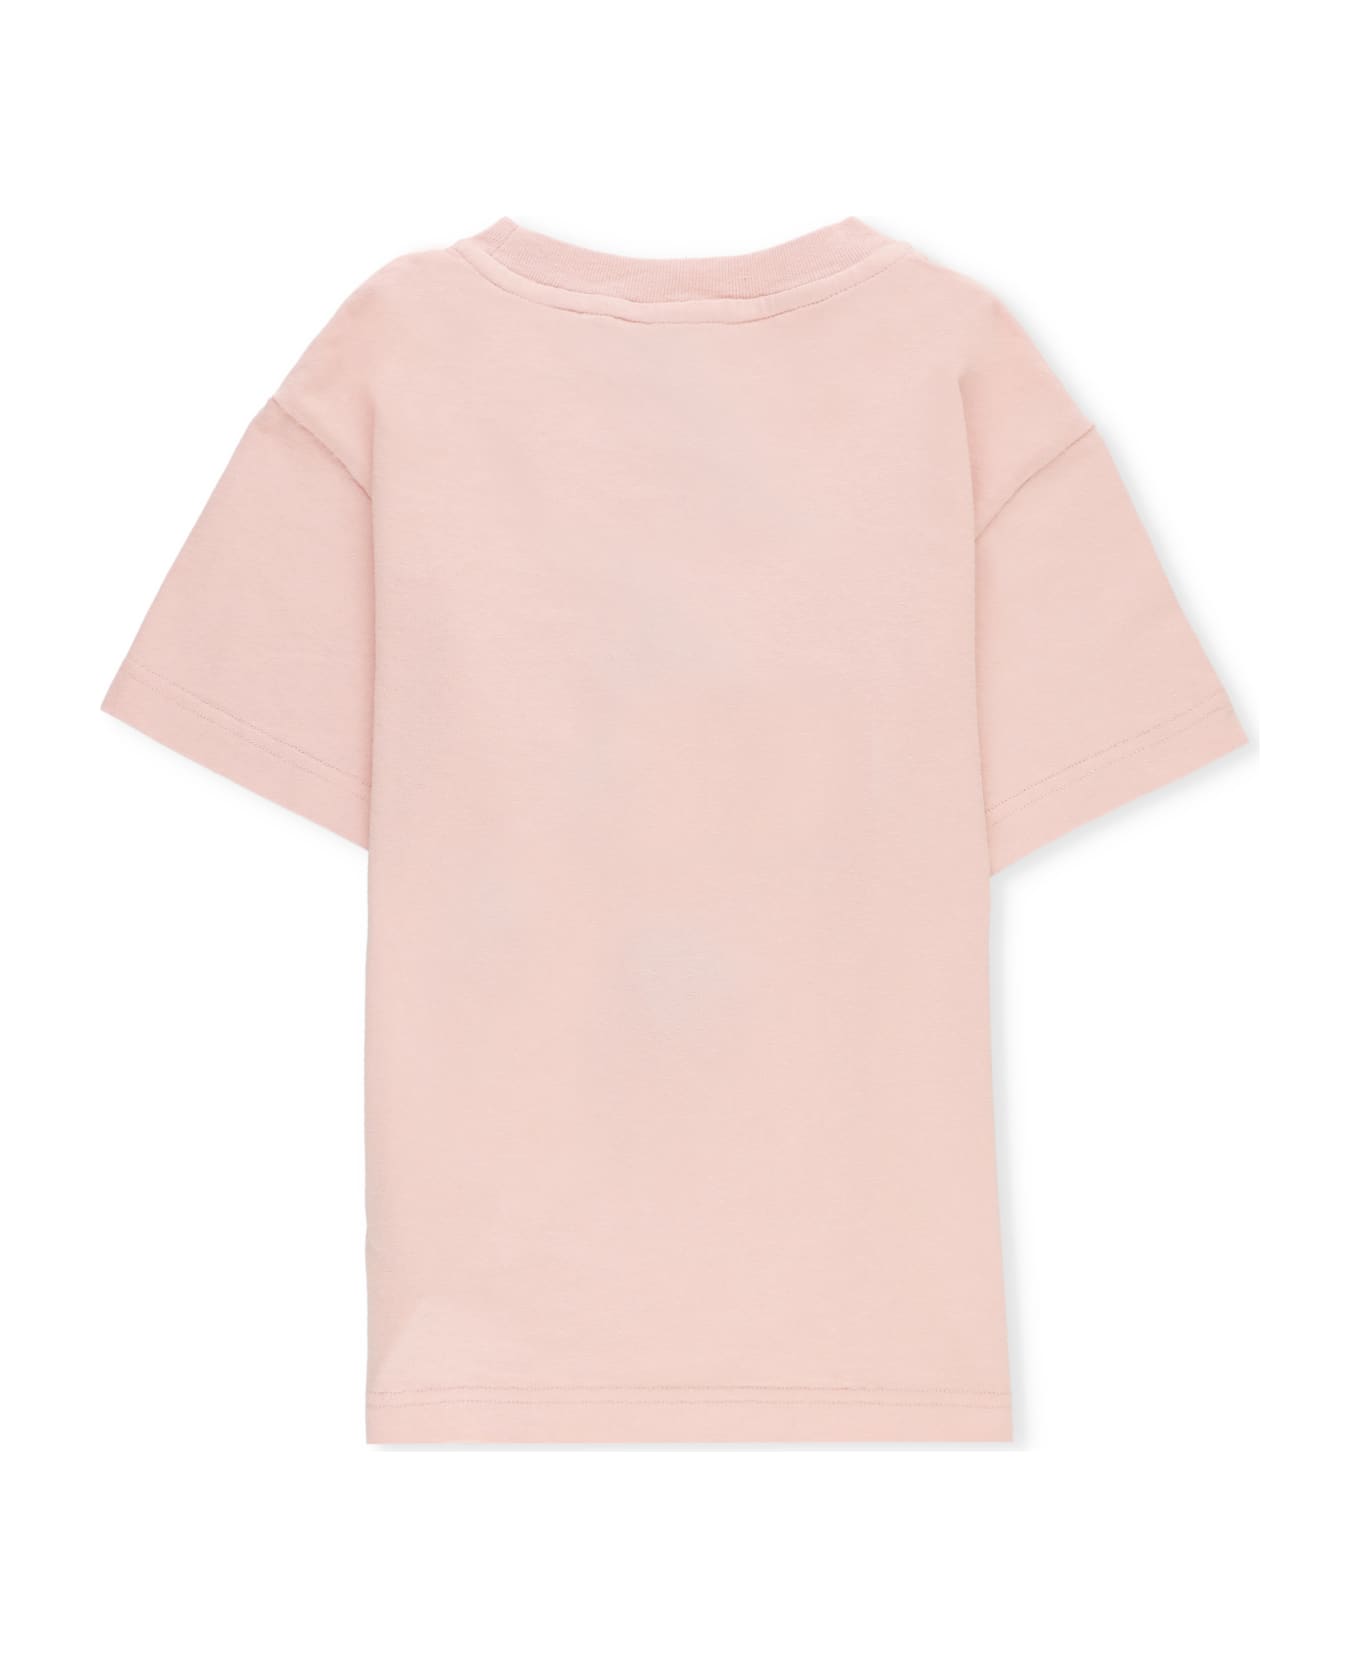 Palm Angels T-shirt With Print - Pink